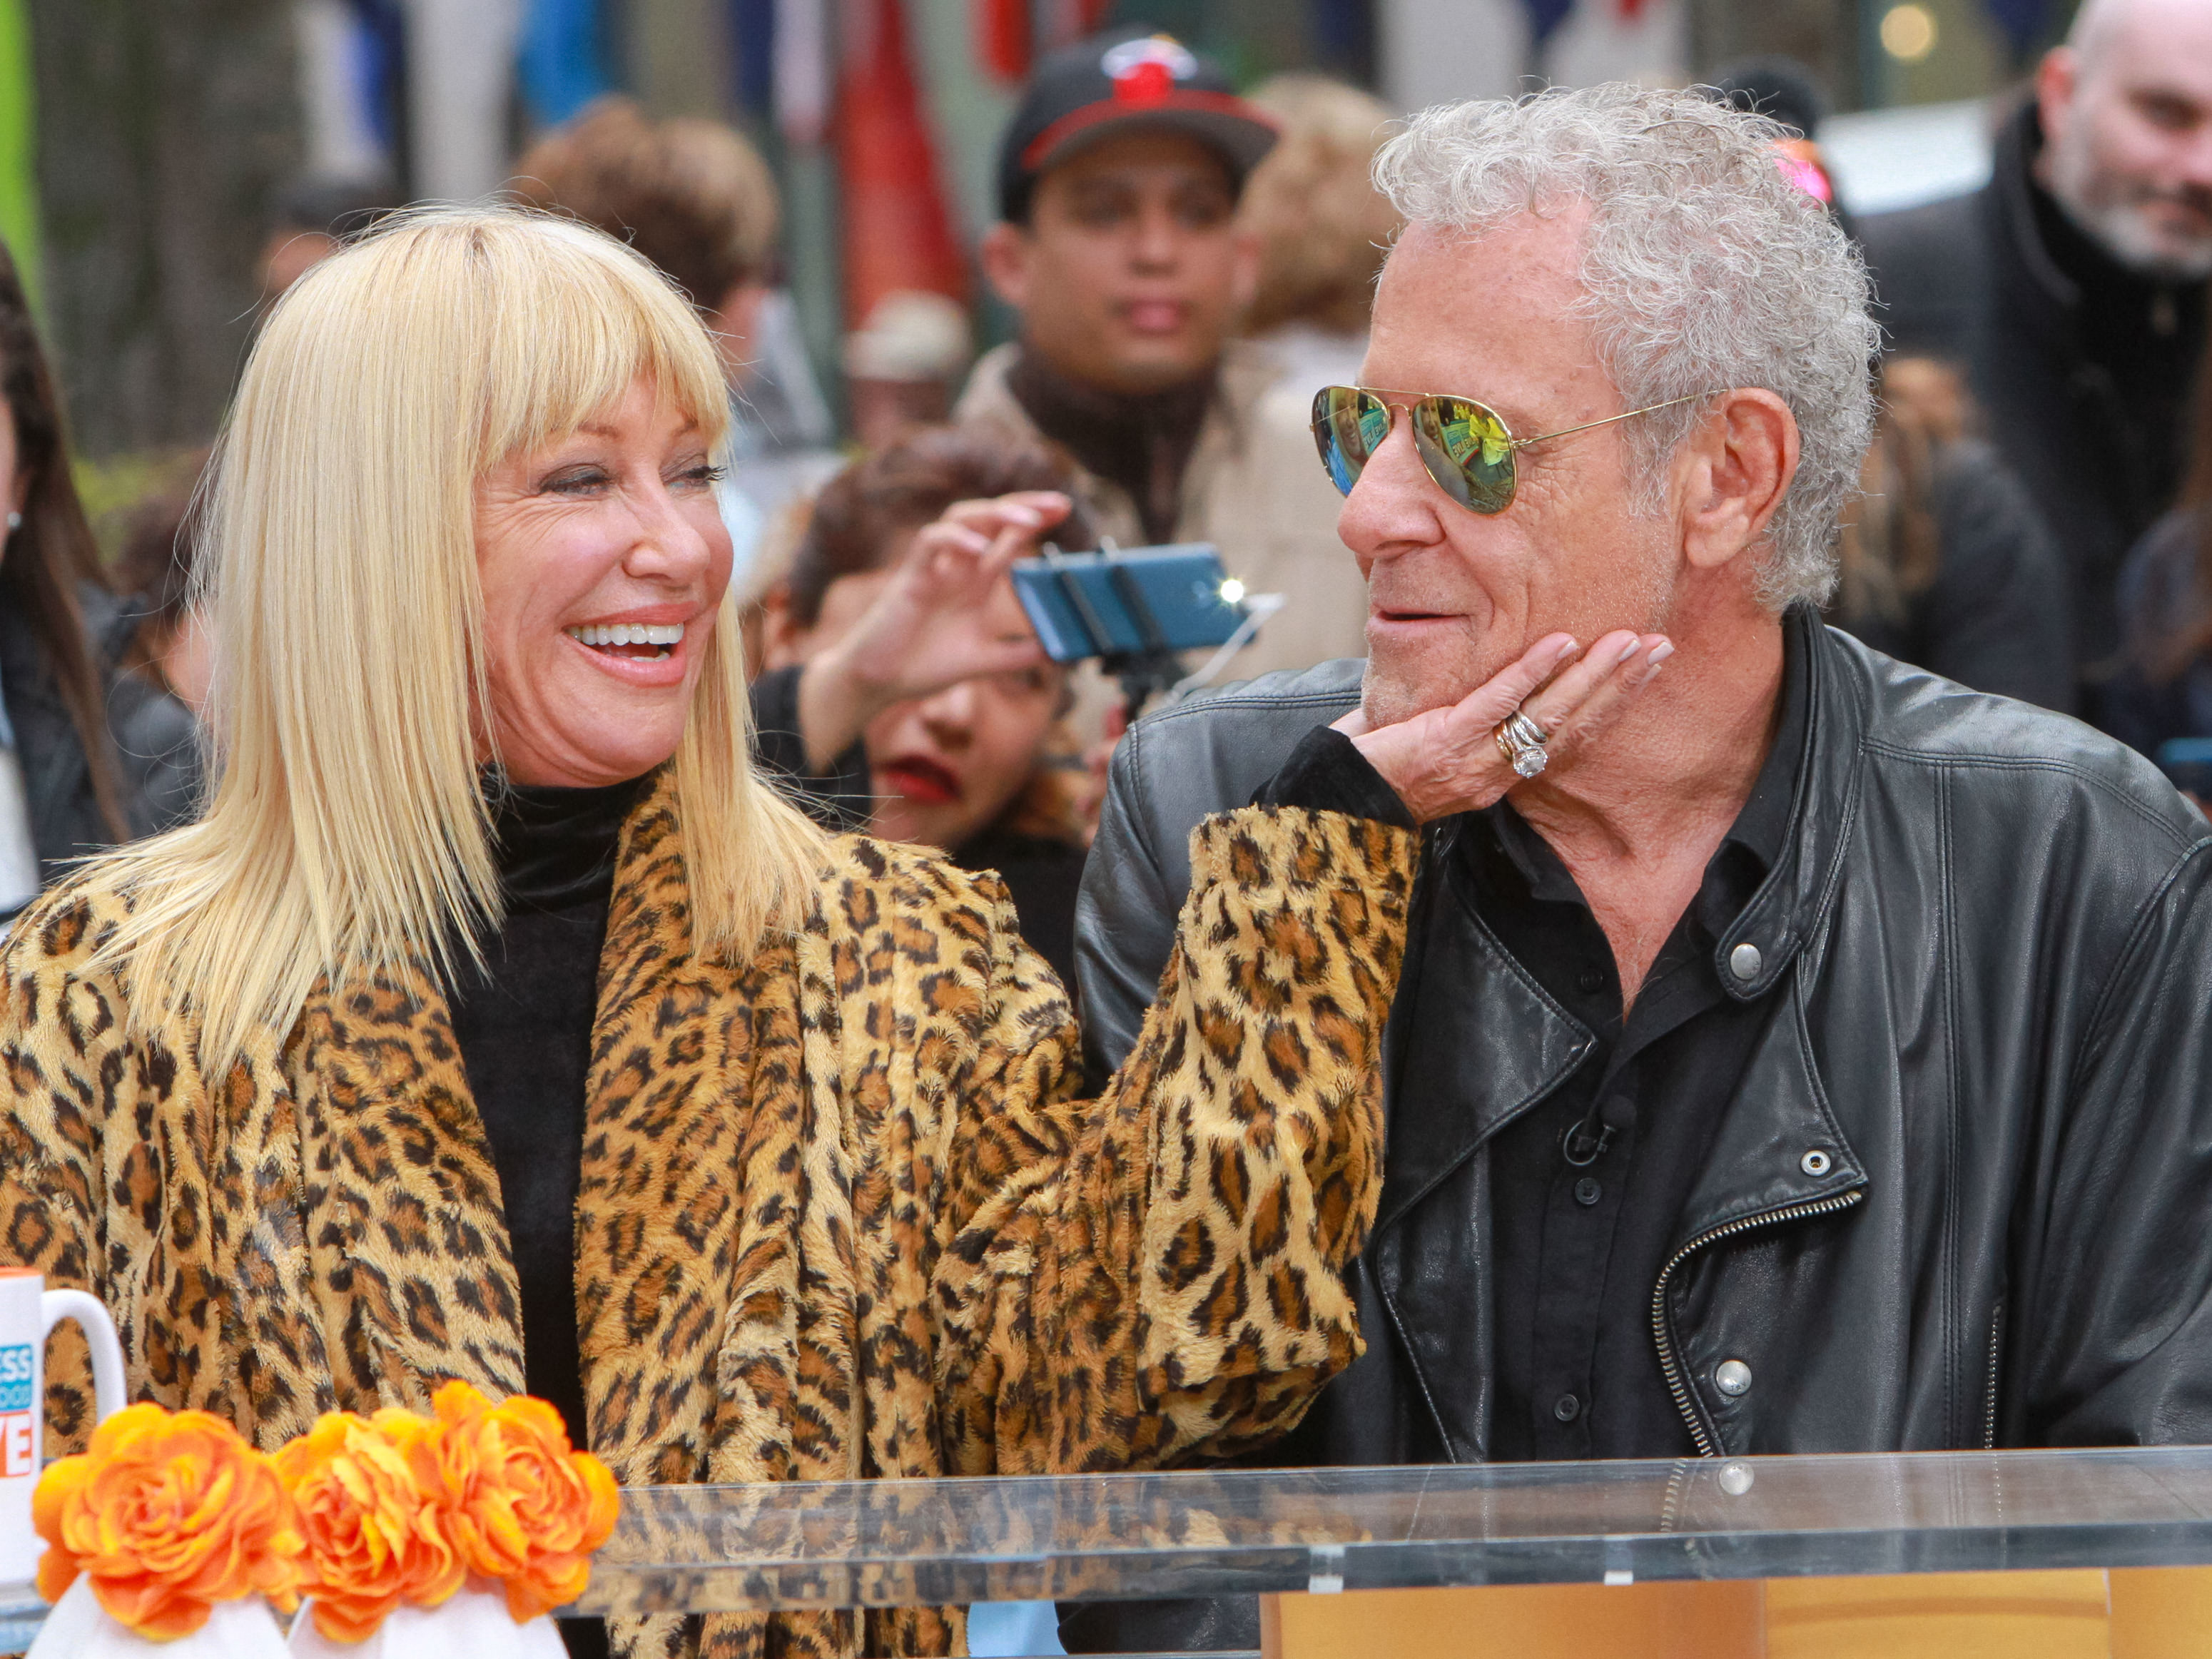 Suzanne Somers and husband Alan Hamel in New York in 2017 | Source: Getty Images